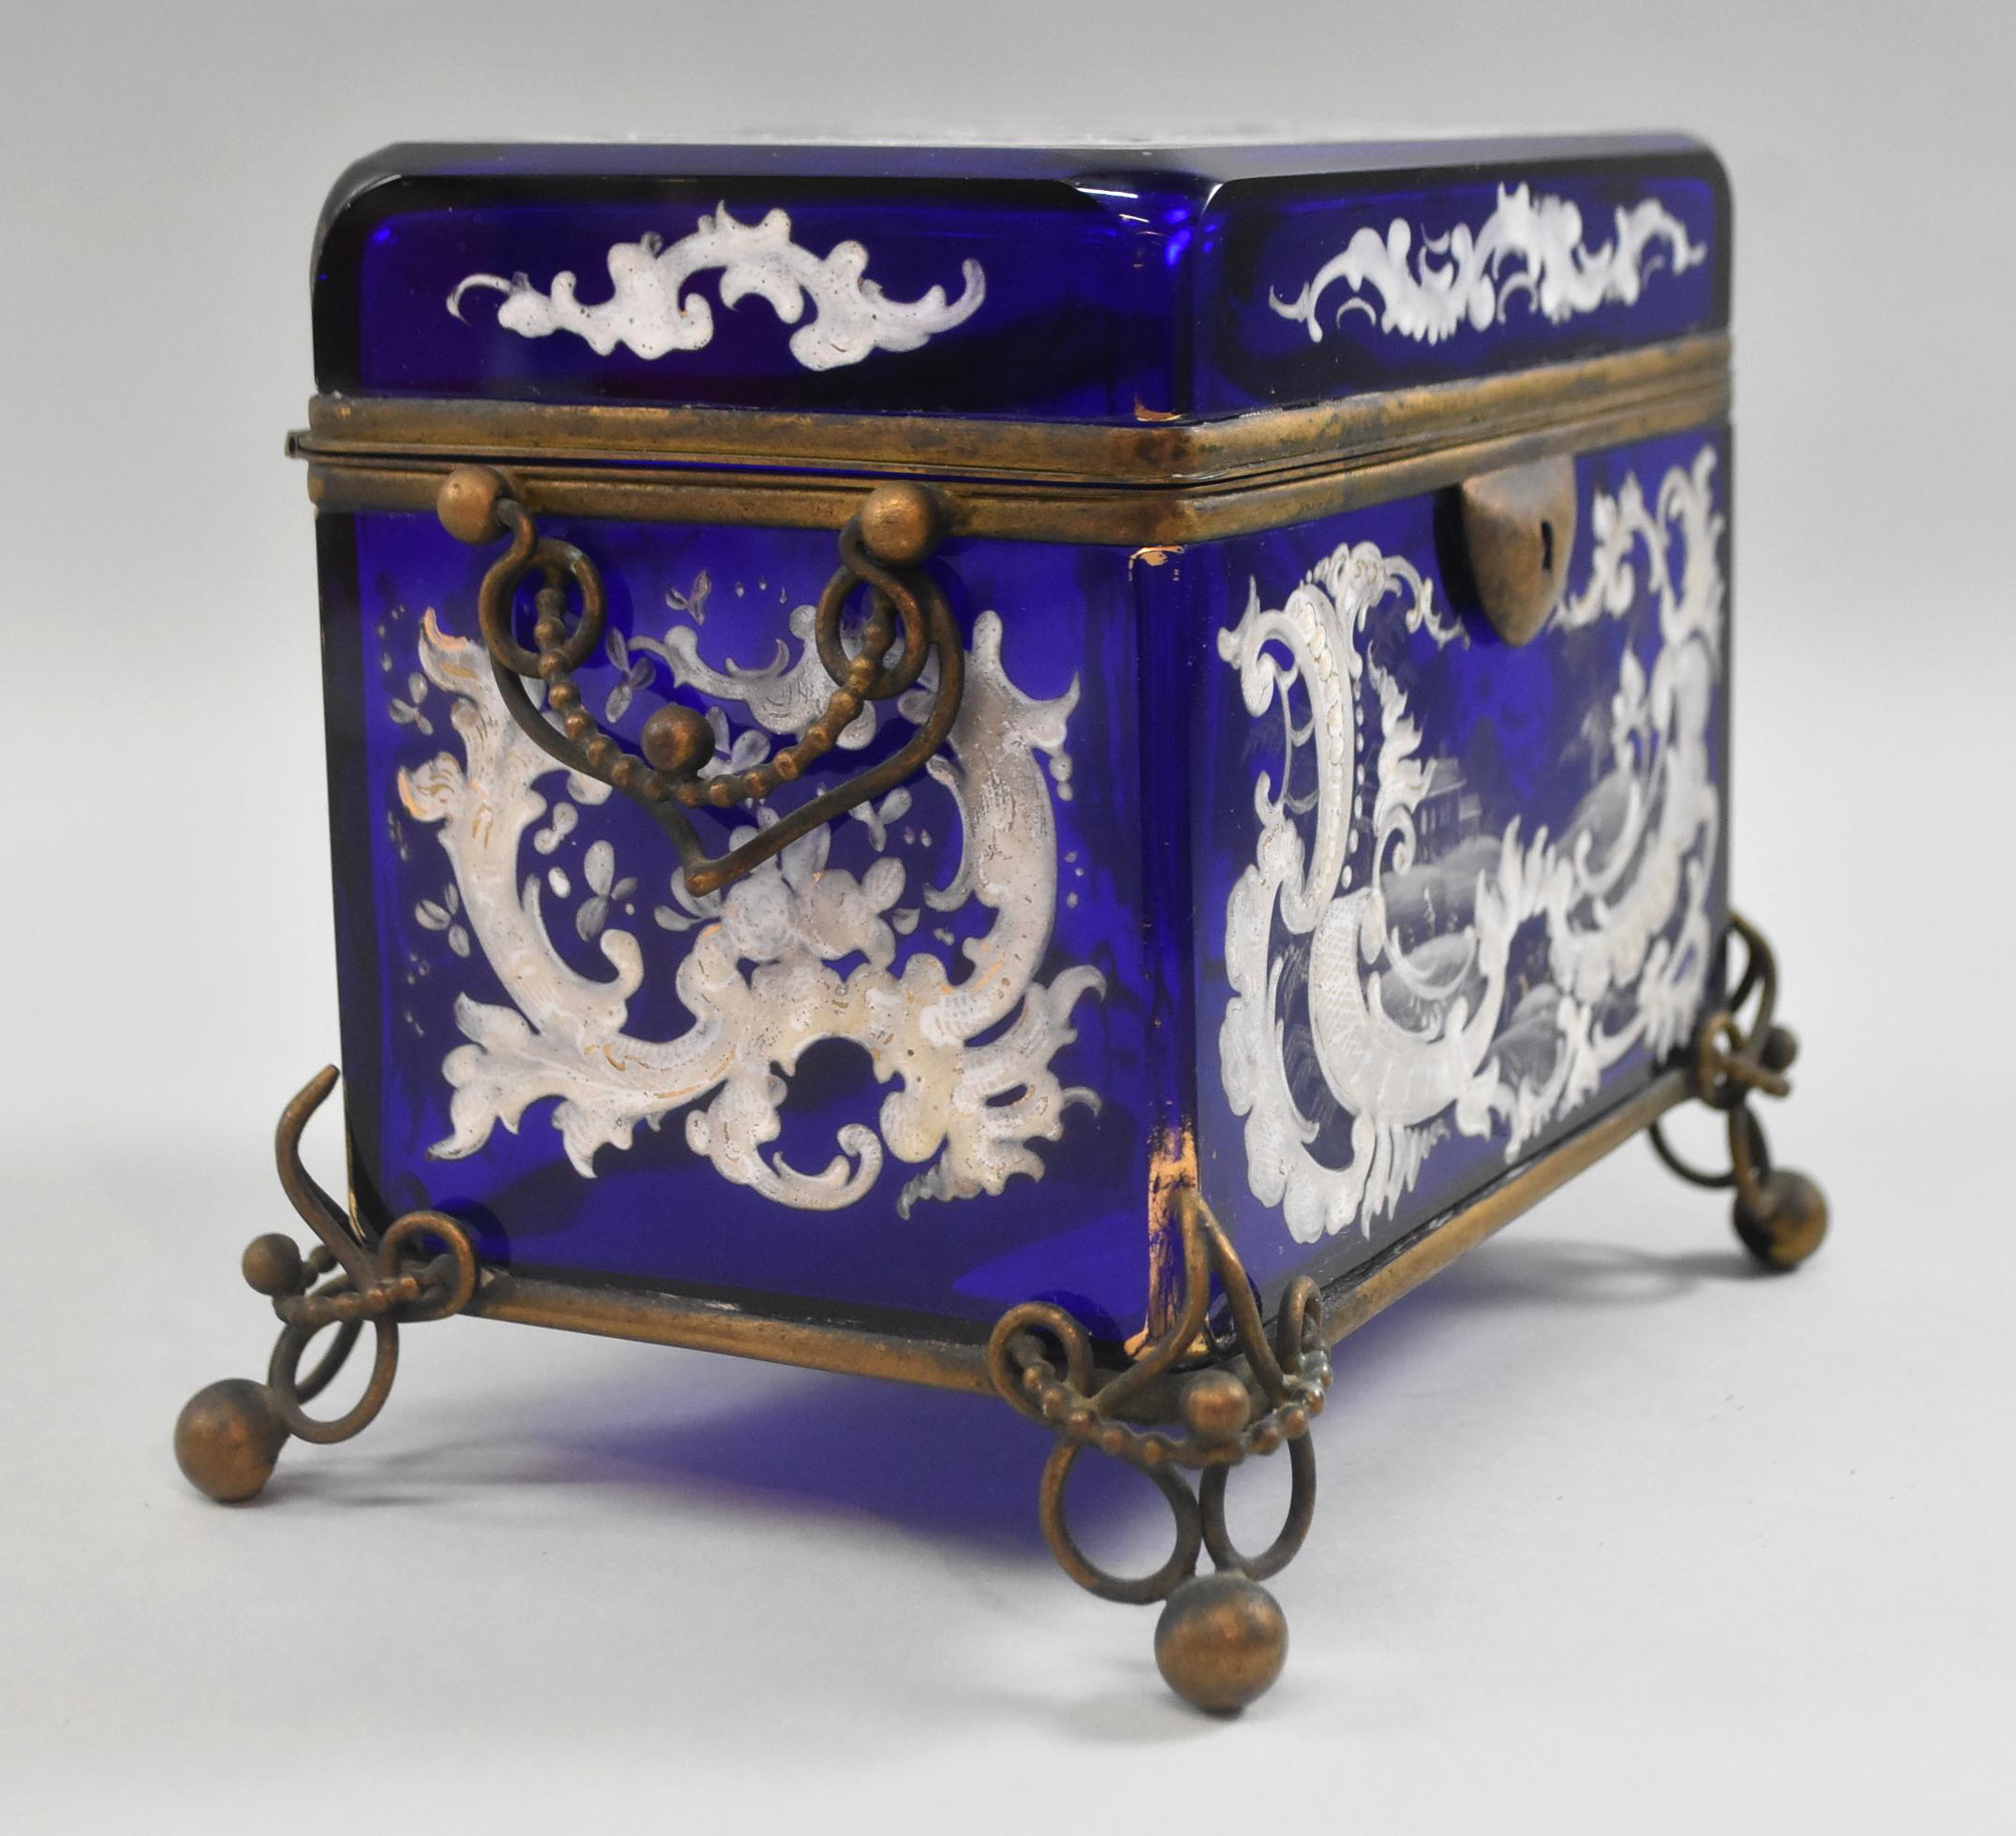 A beautifully decorated antique Victorian cobalt blue jewelry casket / box. Three eights inch thick glass. Hand polished beveled glass edge wall. Heavy enamel paint. Elaborate brass metal work with two hinged handles. Very good condition. No chips